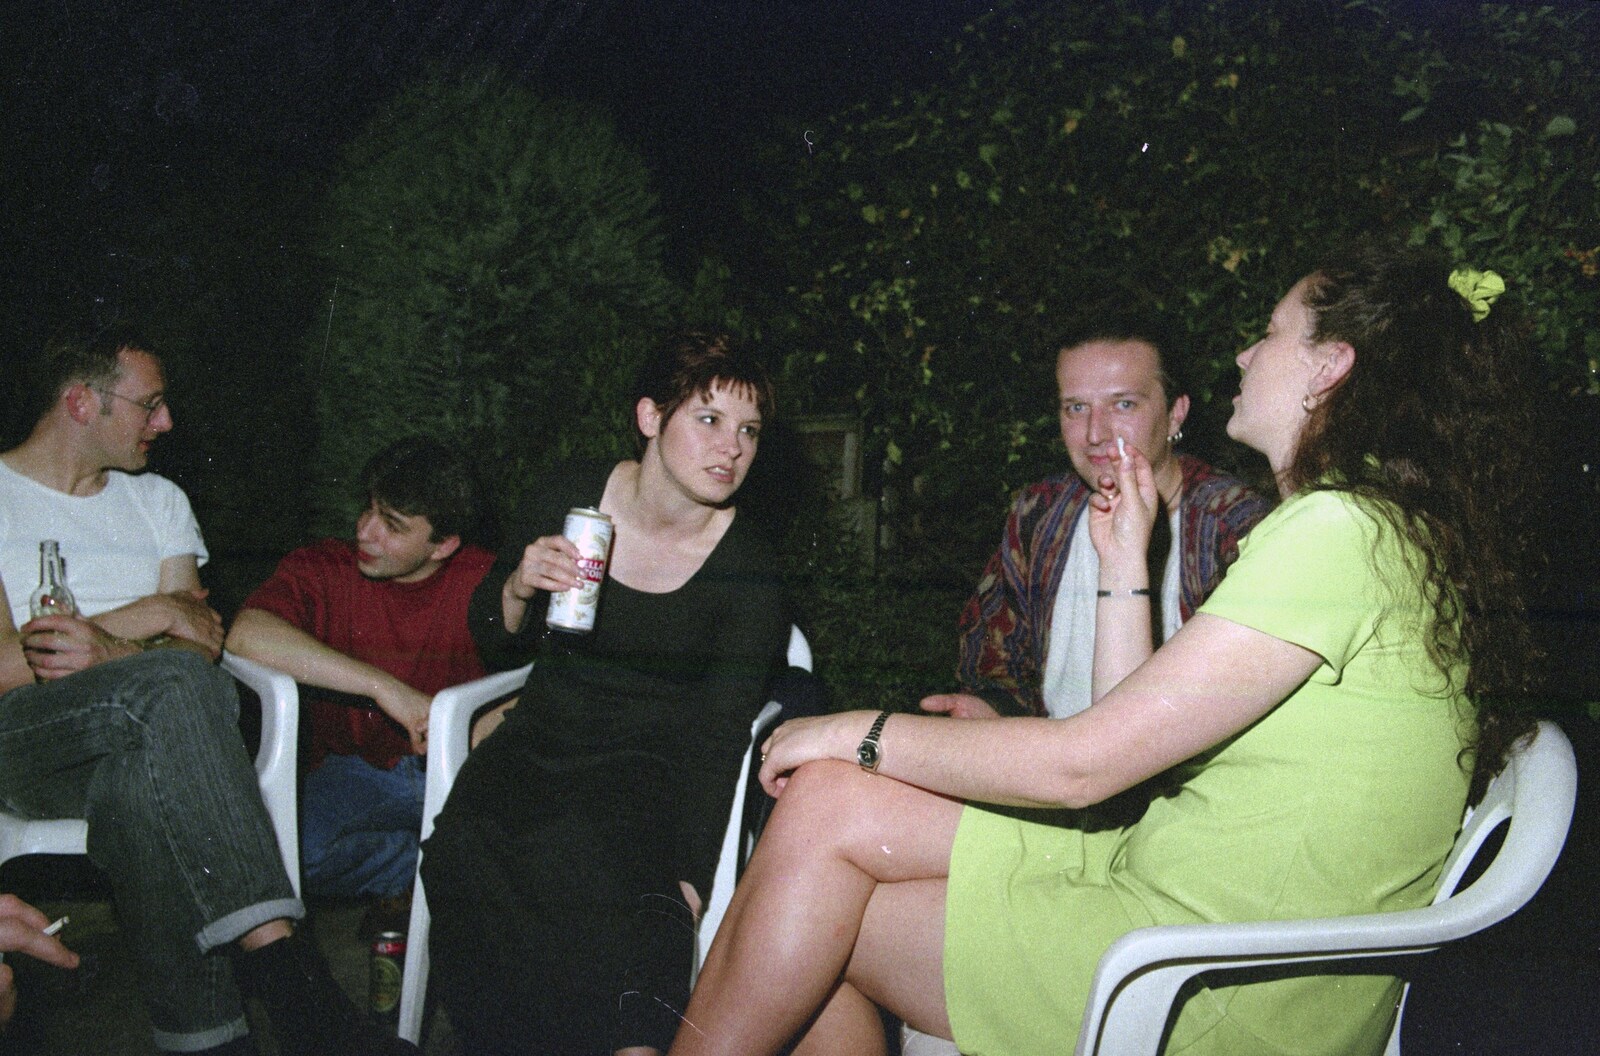 Dougie, Neil, Lisa, Stuart and Sarah from Andrew's CISU Party, and Nosher's Garden Barbeque, Ipswich and Brome, Suffolk - June 10th 1998